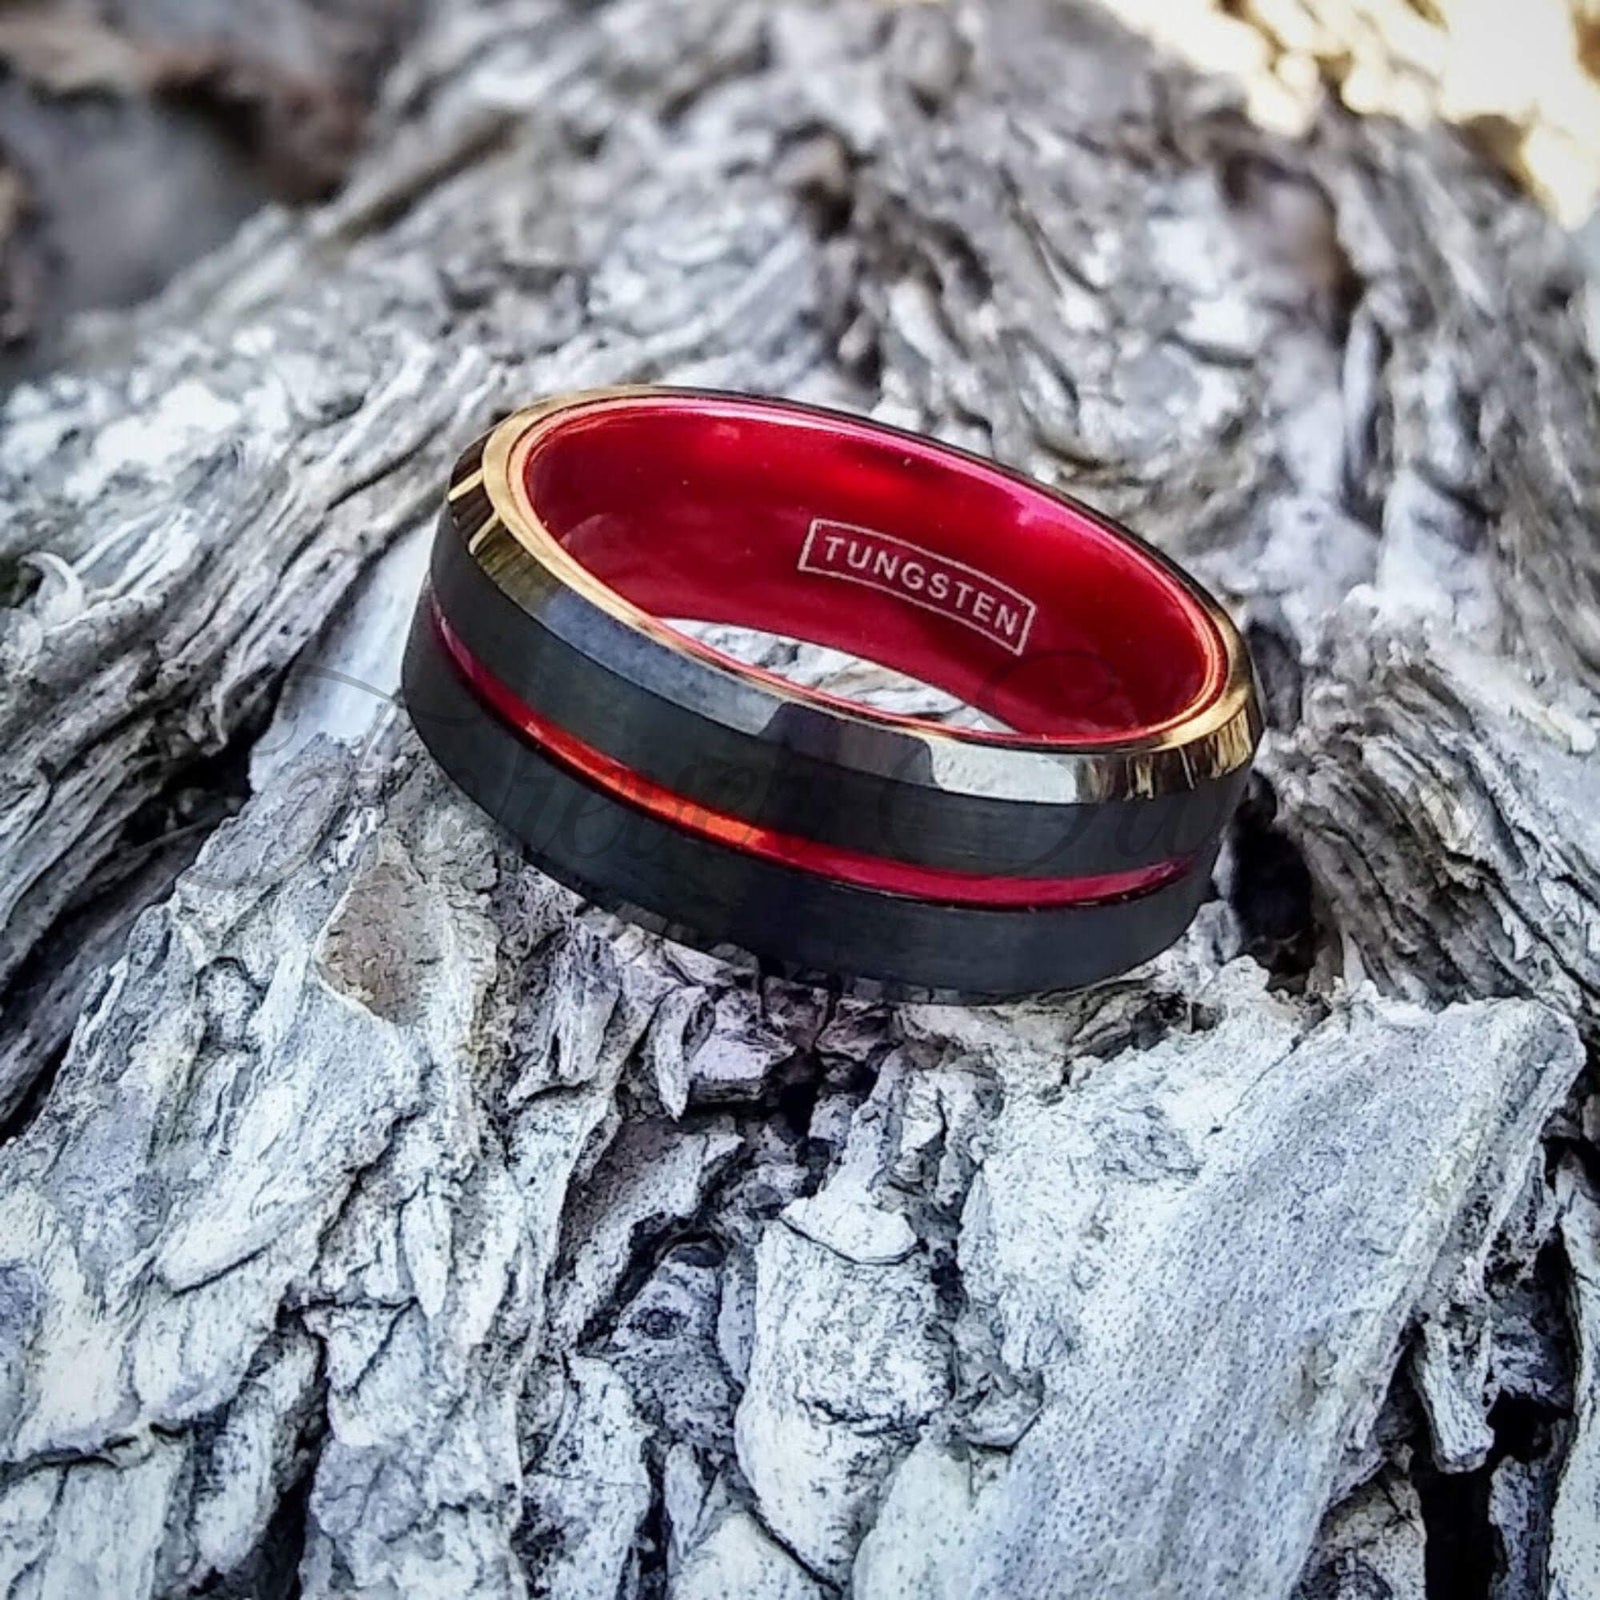 Stainless Steel Black Plain Couple Rings, Custom Inside/Outside Engraved  Ring | Alada Collections